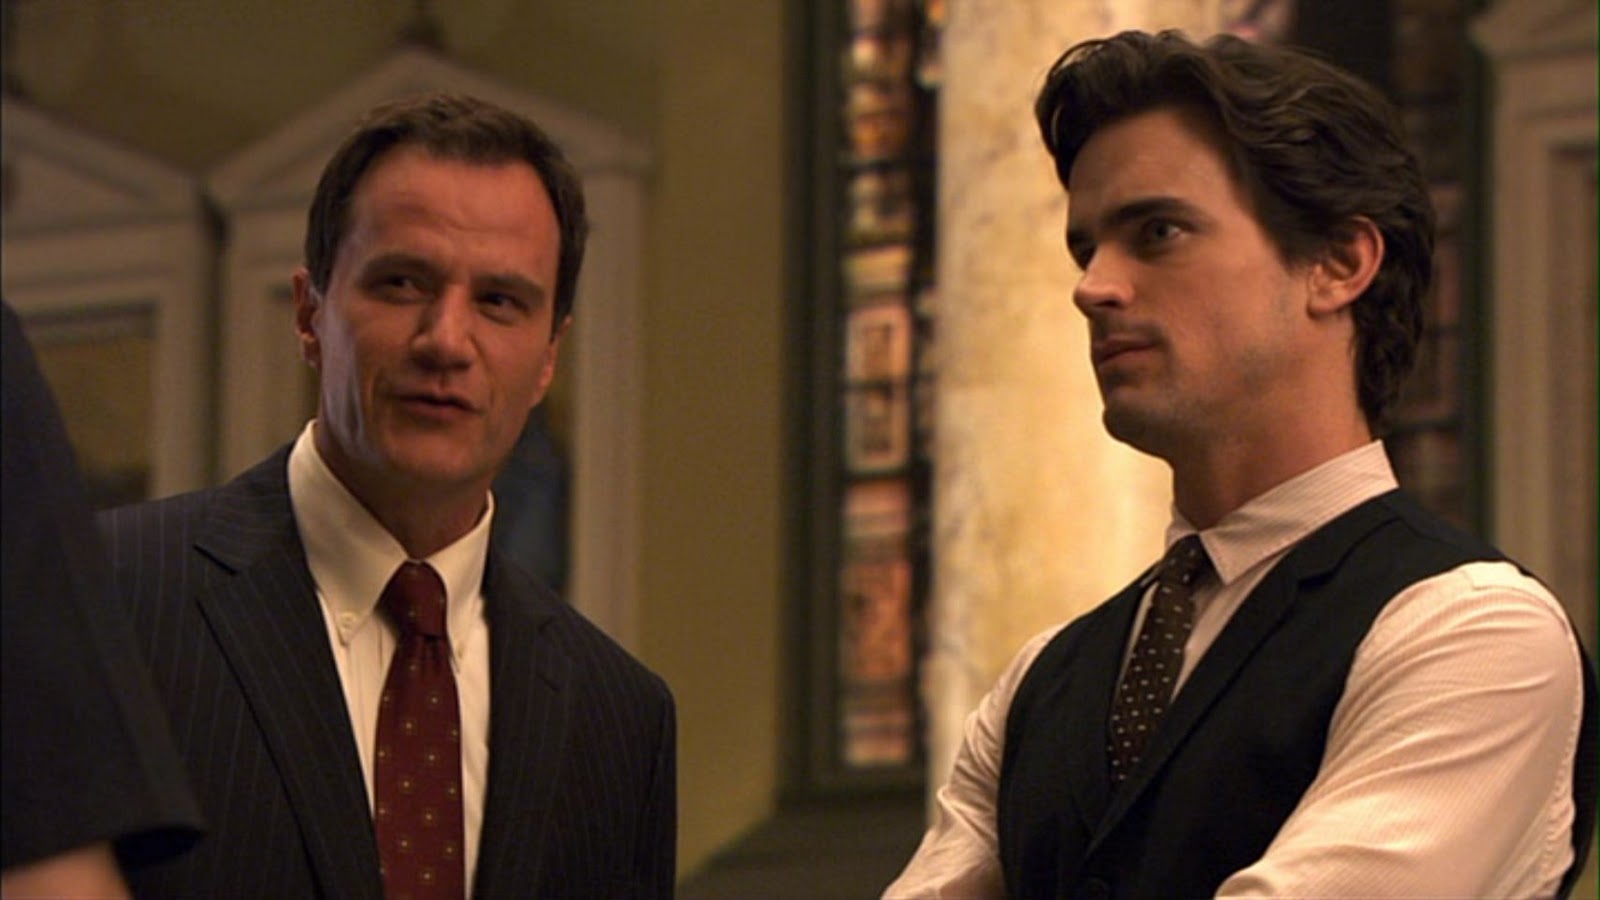 White Collar Where There's a Will (TV Episode 2011) - IMDb